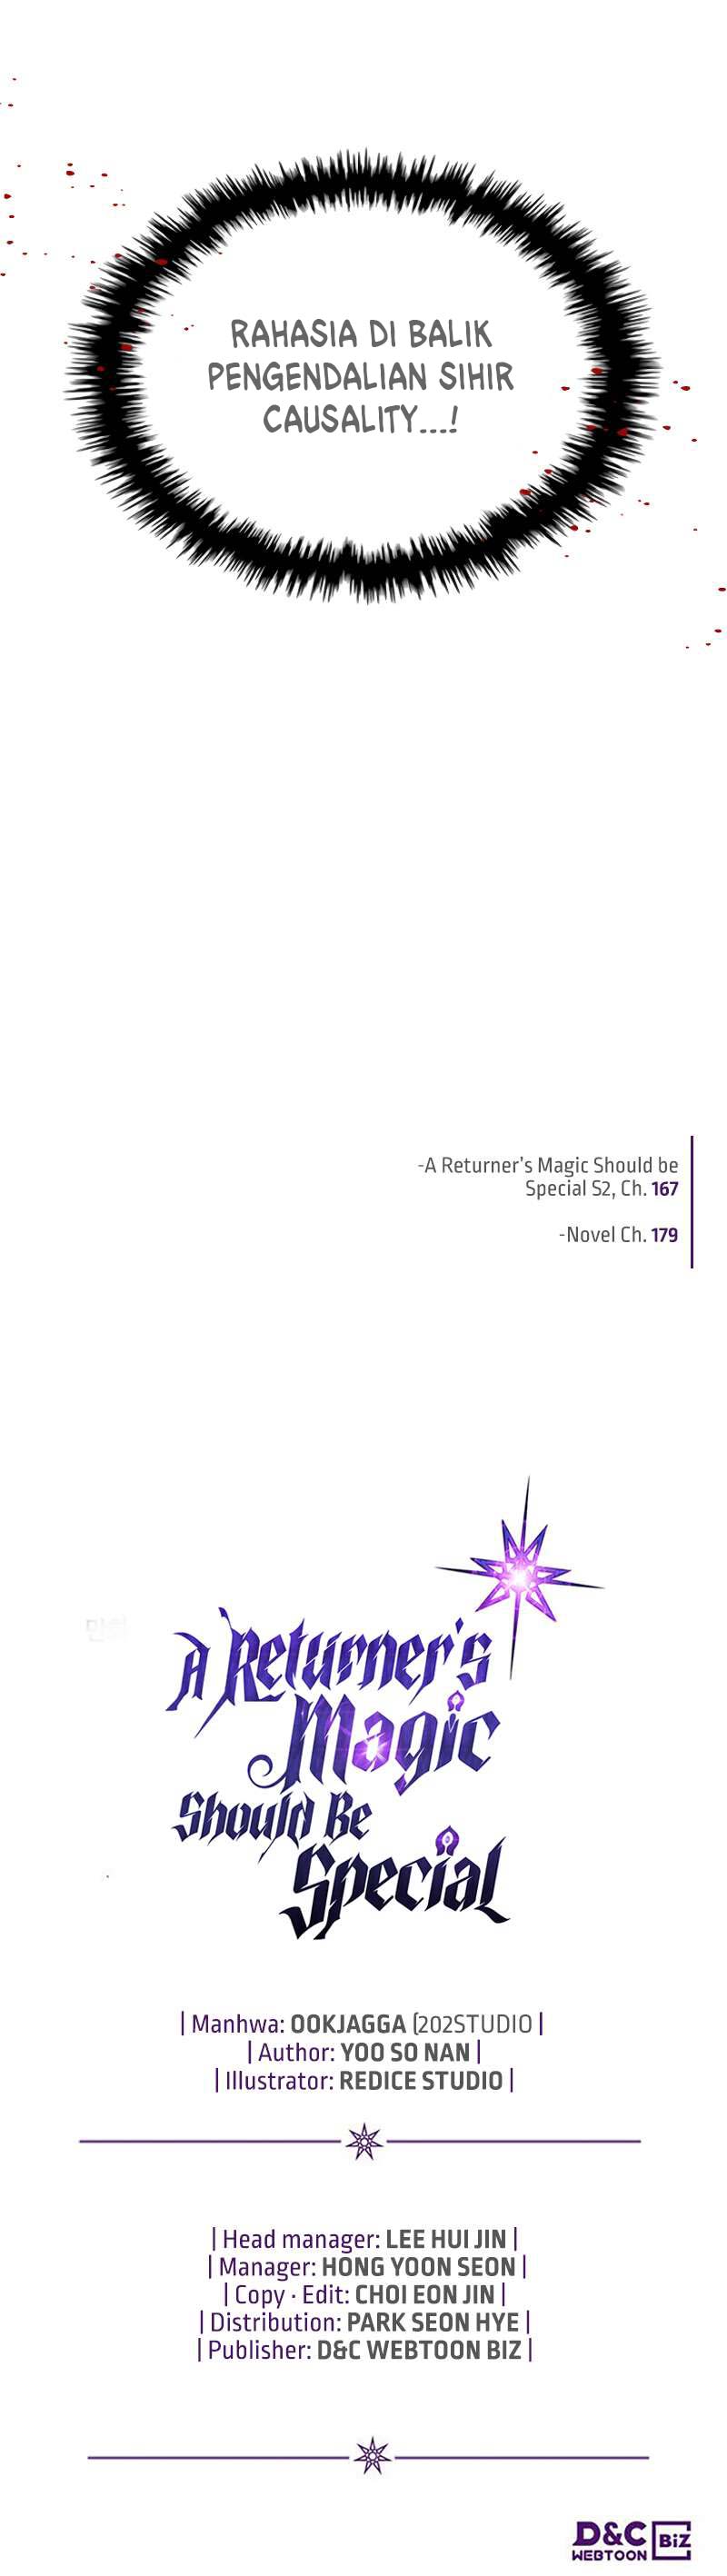 A Returner’s Magic Should Be Special Chapter 167